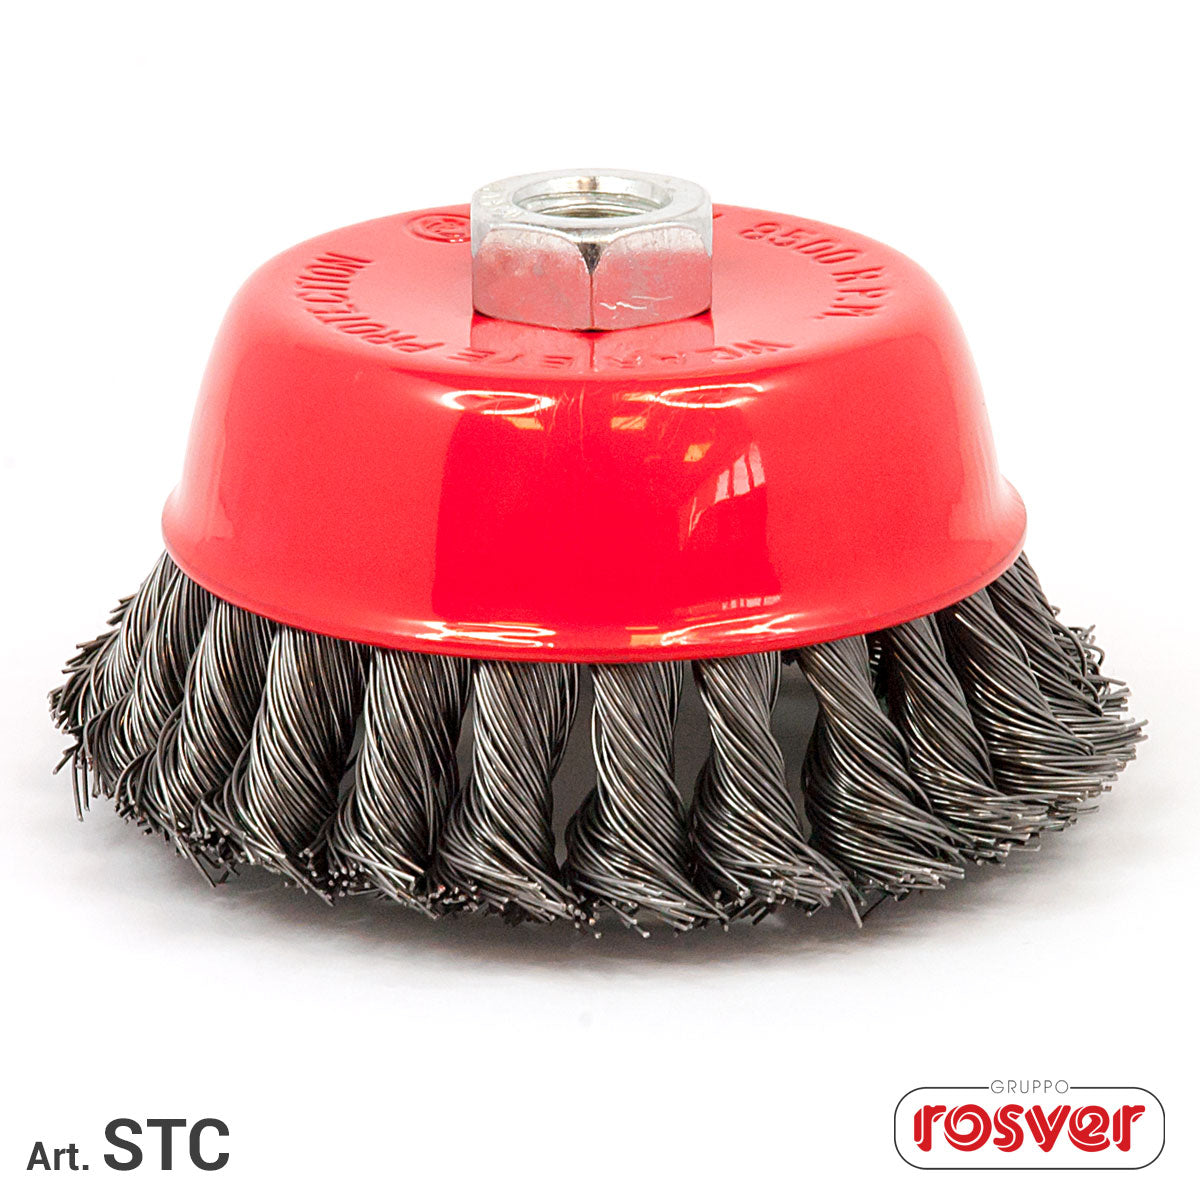 Twisted Cup Brush - Rosver - STC D.65 F.M14 - Conf.1pz